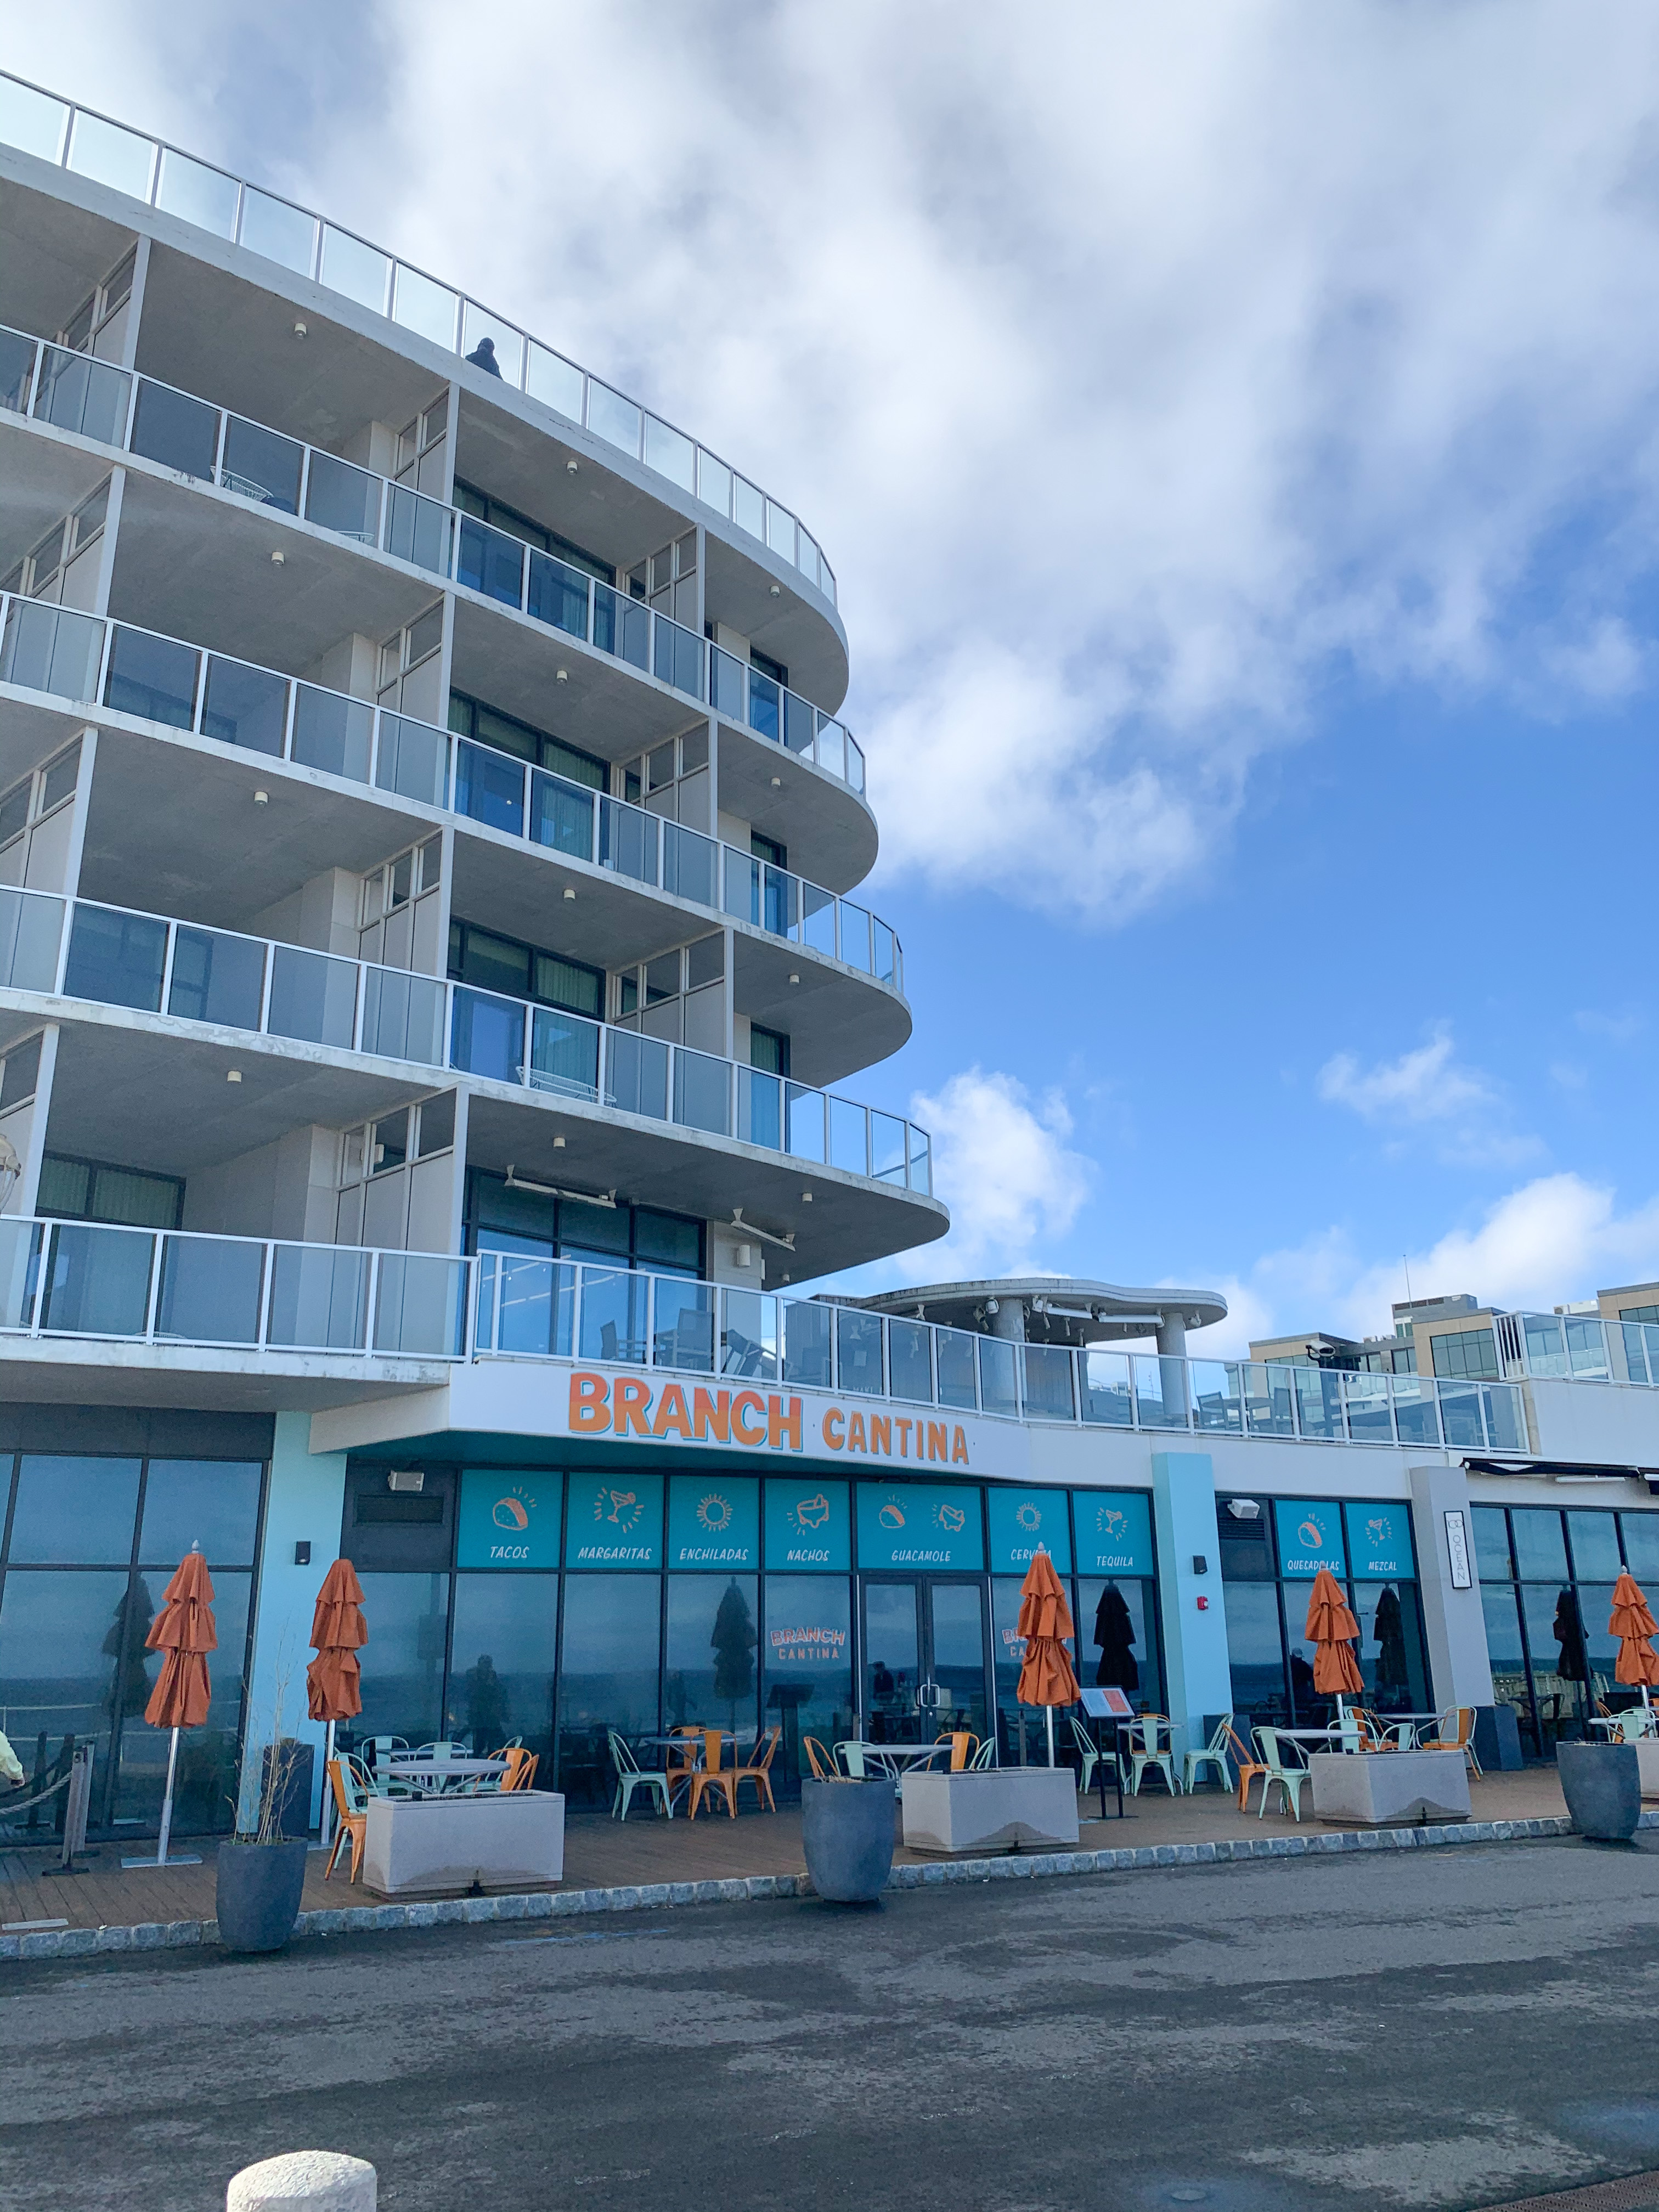 Things to Do in Long Branch, NJ - Wave Resort